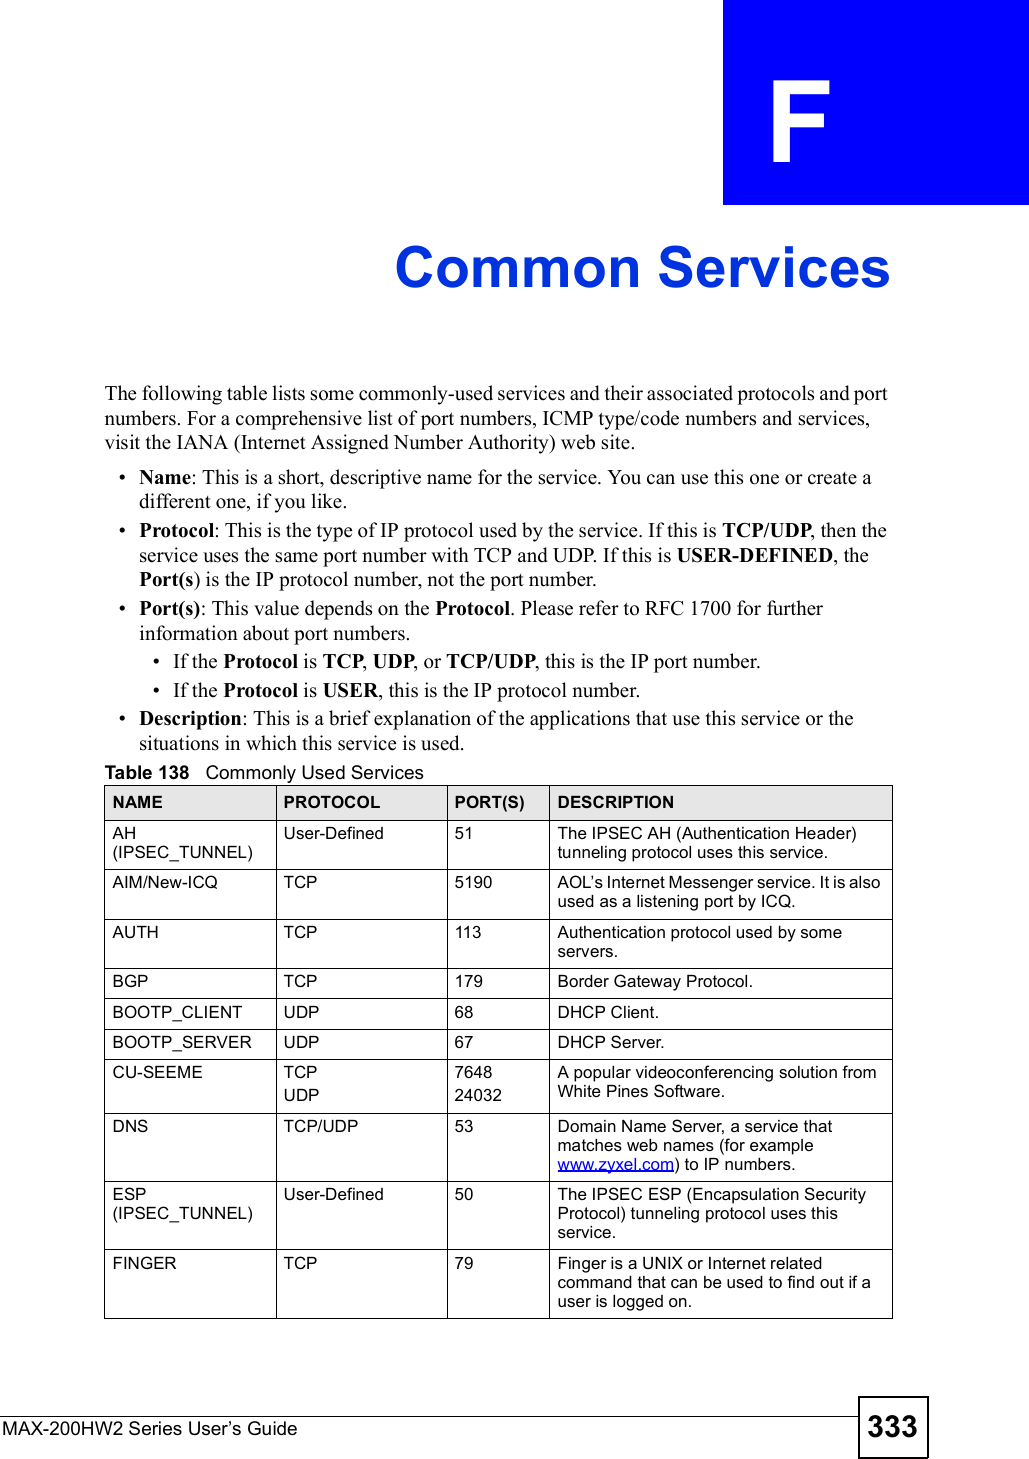 MAX-200HW2 Series User s Guide 333APPENDIX  F Common ServicesThe following table lists some commonly-used services and their associated protocols and port numbers. For a comprehensive list of port numbers, ICMP type/code numbers and services, visit the IANA (Internet Assigned Number Authority) web site.  Name: This is a short, descriptive name for the service. You can use this one or create a different one, if you like. Protocol: This is the type of IP protocol used by the service. If this is TCP/UDP, then the service uses the same port number with TCP and UDP. If this is USER-DEFINED, the Port(s) is the IP protocol number, not the port number. Port(s): This value depends on the Protocol. Please refer to RFC 1700 for further information about port numbers. If the Protocol is TCP,UDP, or TCP/UDP, this is the IP port number. If the Protocol is USER, this is the IP protocol number. Description: This is a brief explanation of the applications that use this service or the situations in which this service is used.Table 138   Commonly Used ServicesNAME PROTOCOL PORT(S) DESCRIPTIONAH (IPSEC_TUNNEL)User-Defined 51 The IPSEC AH (Authentication Header) tunneling protocol uses this service.AIM/New-ICQ TCP 5190 AOL s Internet Messenger service. It is also used as a listening port by ICQ.AUTH TCP 113 Authentication protocol used by some servers.BGP TCP 179 Border Gateway Protocol.BOOTP_CLIENT UDP 68 DHCP Client.BOOTP_SERVER UDP 67 DHCP Server.CU-SEEME TCPUDP764824032A popular videoconferencing solution from White Pines Software.DNS TCP/UDP 53 Domain Name Server, a service that matches web names (for example www.zyxel.com) to IP numbers.ESP (IPSEC_TUNNEL)User-Defined 50 The IPSEC ESP (Encapsulation Security Protocol) tunneling protocol uses this service.FINGER TCP 79 Finger is a UNIX or Internet related command that can be used to find out if a user is logged on.